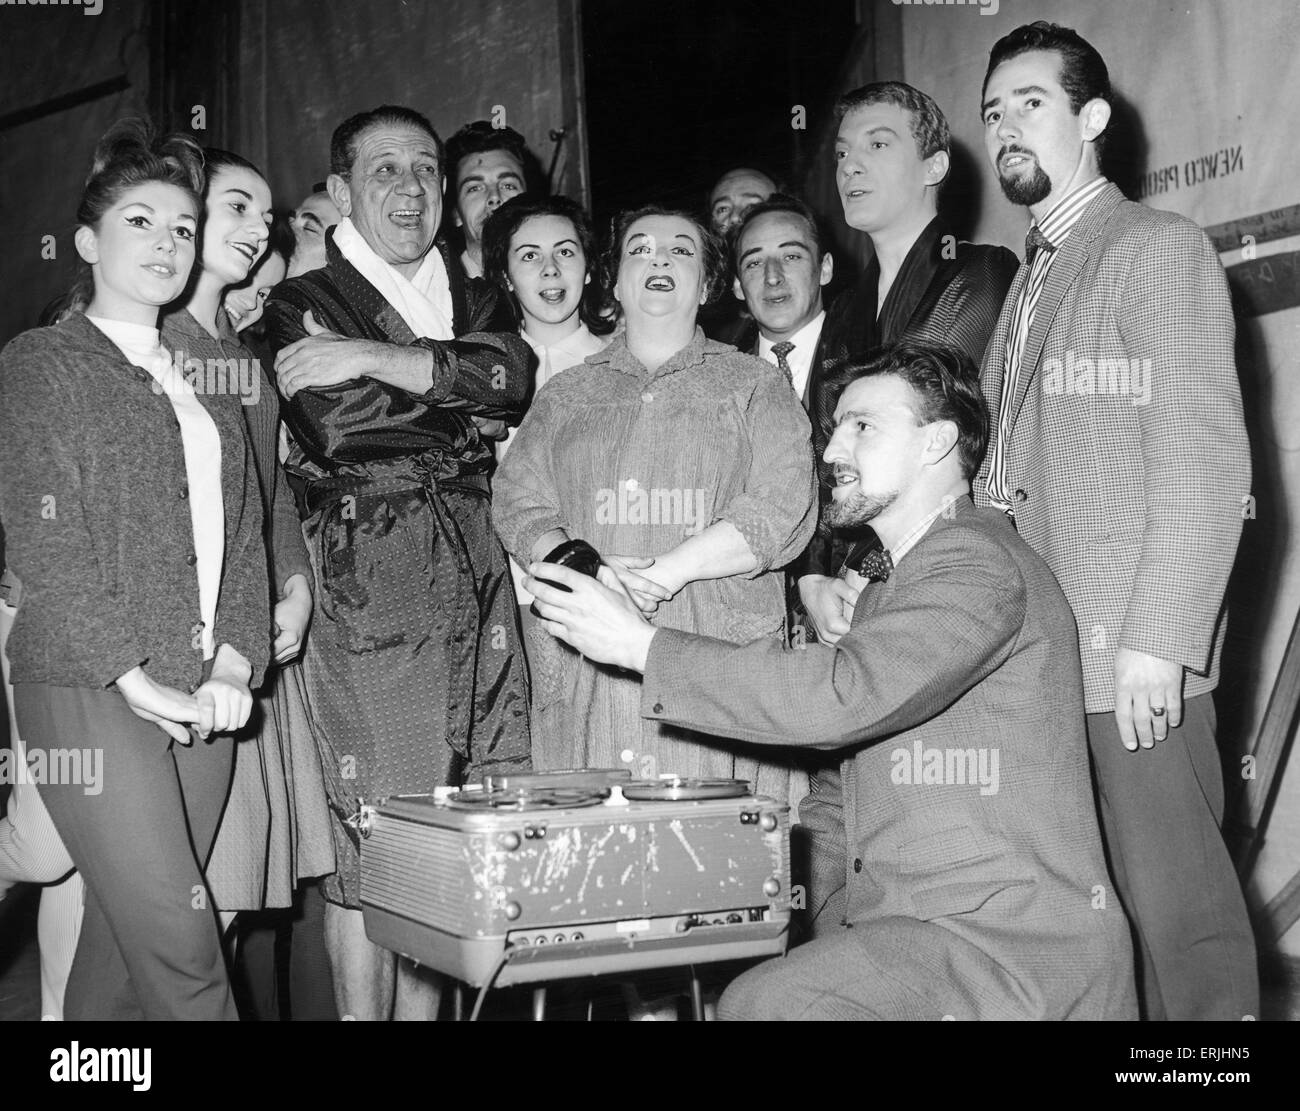 Jimmy Hill of Coventry City seen here with Sid James and the cast of Puss in Boots record The Coventry City song at the Coventry Theatre. 21st December 1962 Stock Photo